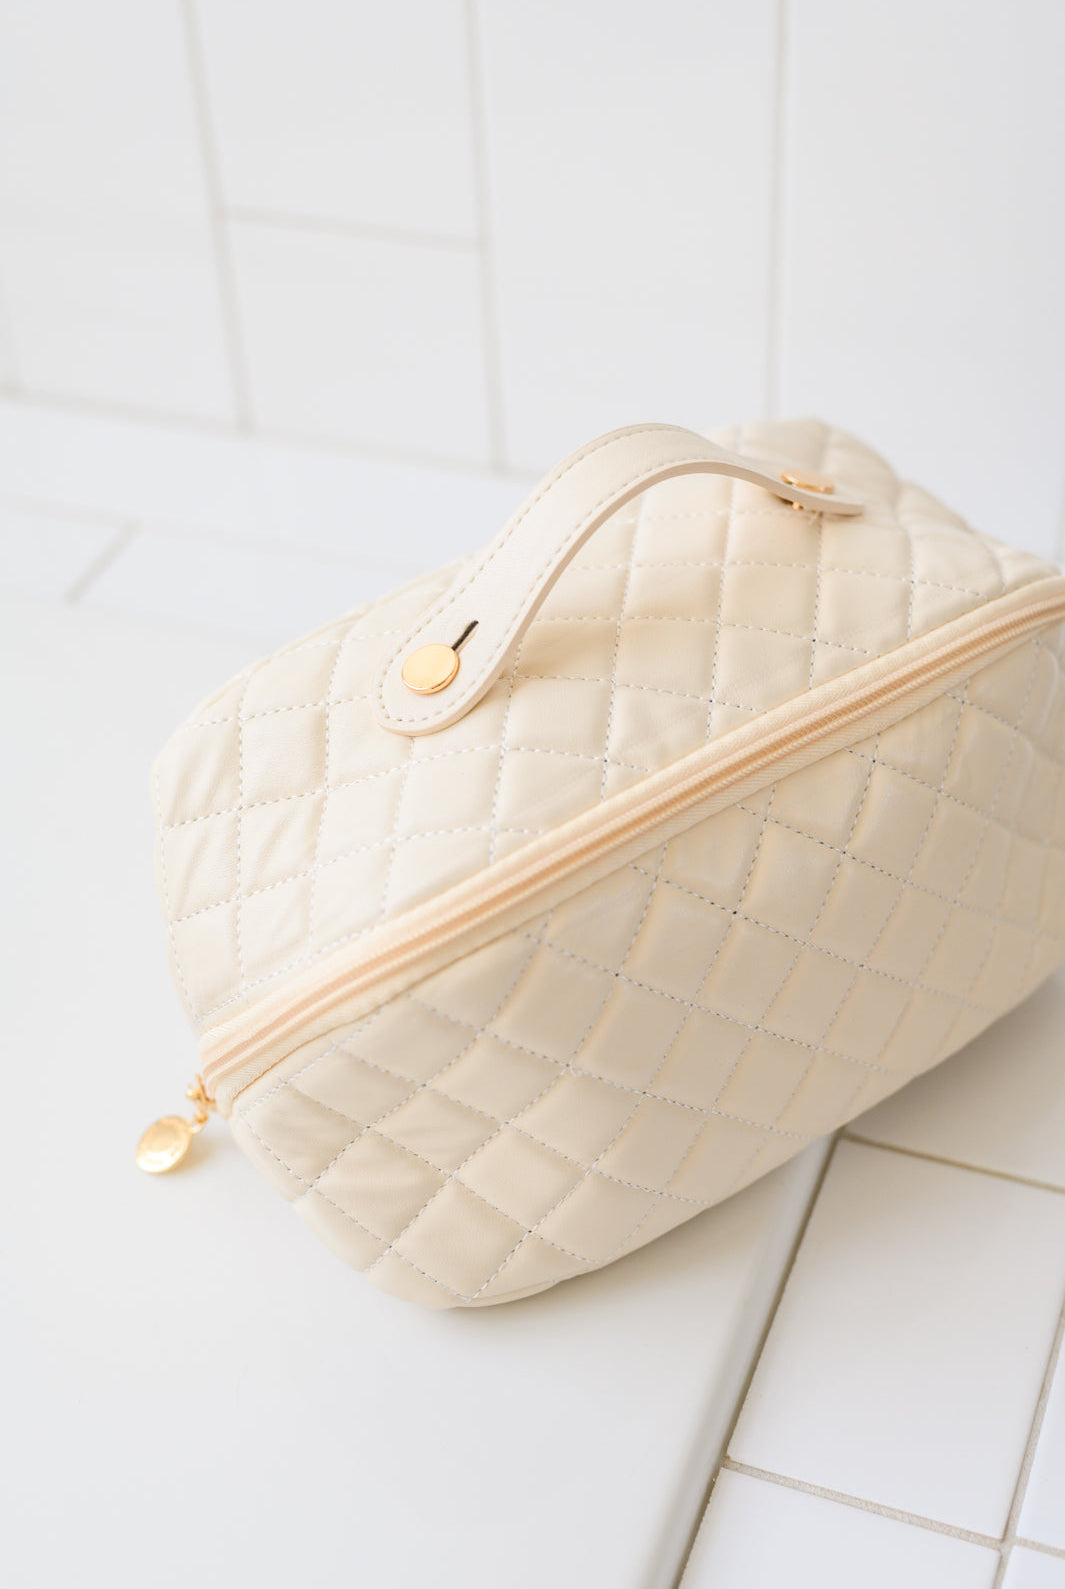 Large Capacity Quilted Makeup Bag in Cream-Handbags-Ave Shops-Urban Threadz Boutique, Women's Fashion Boutique in Saugatuck, MI